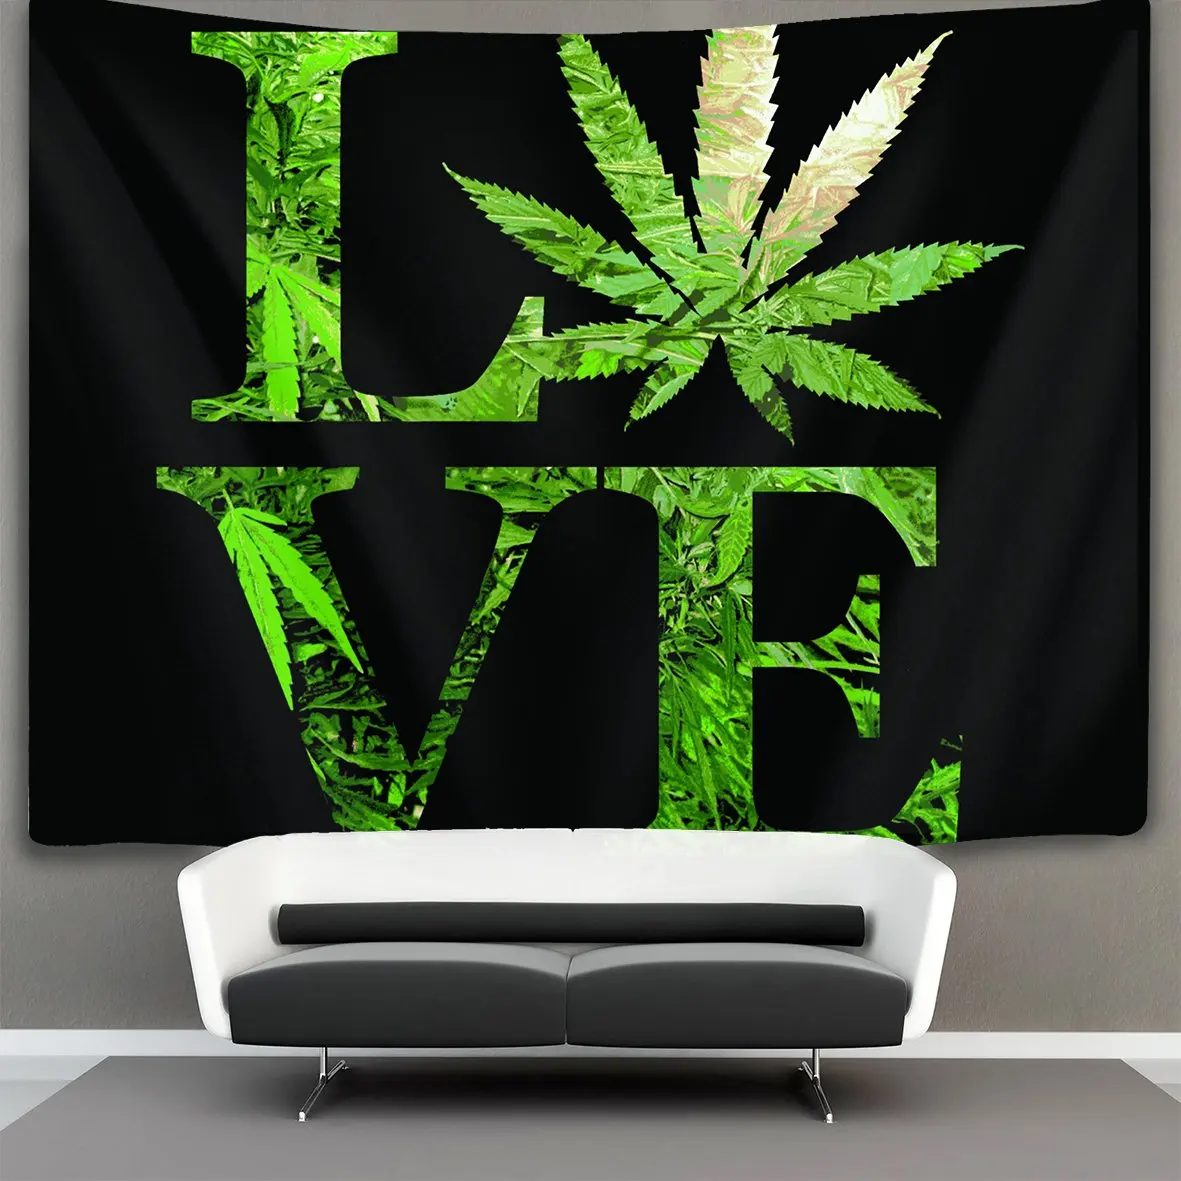 

LOVE Weed Leaf Wall Tapestry Hippie Art Home Decor For Bedroom Living Room Dorm